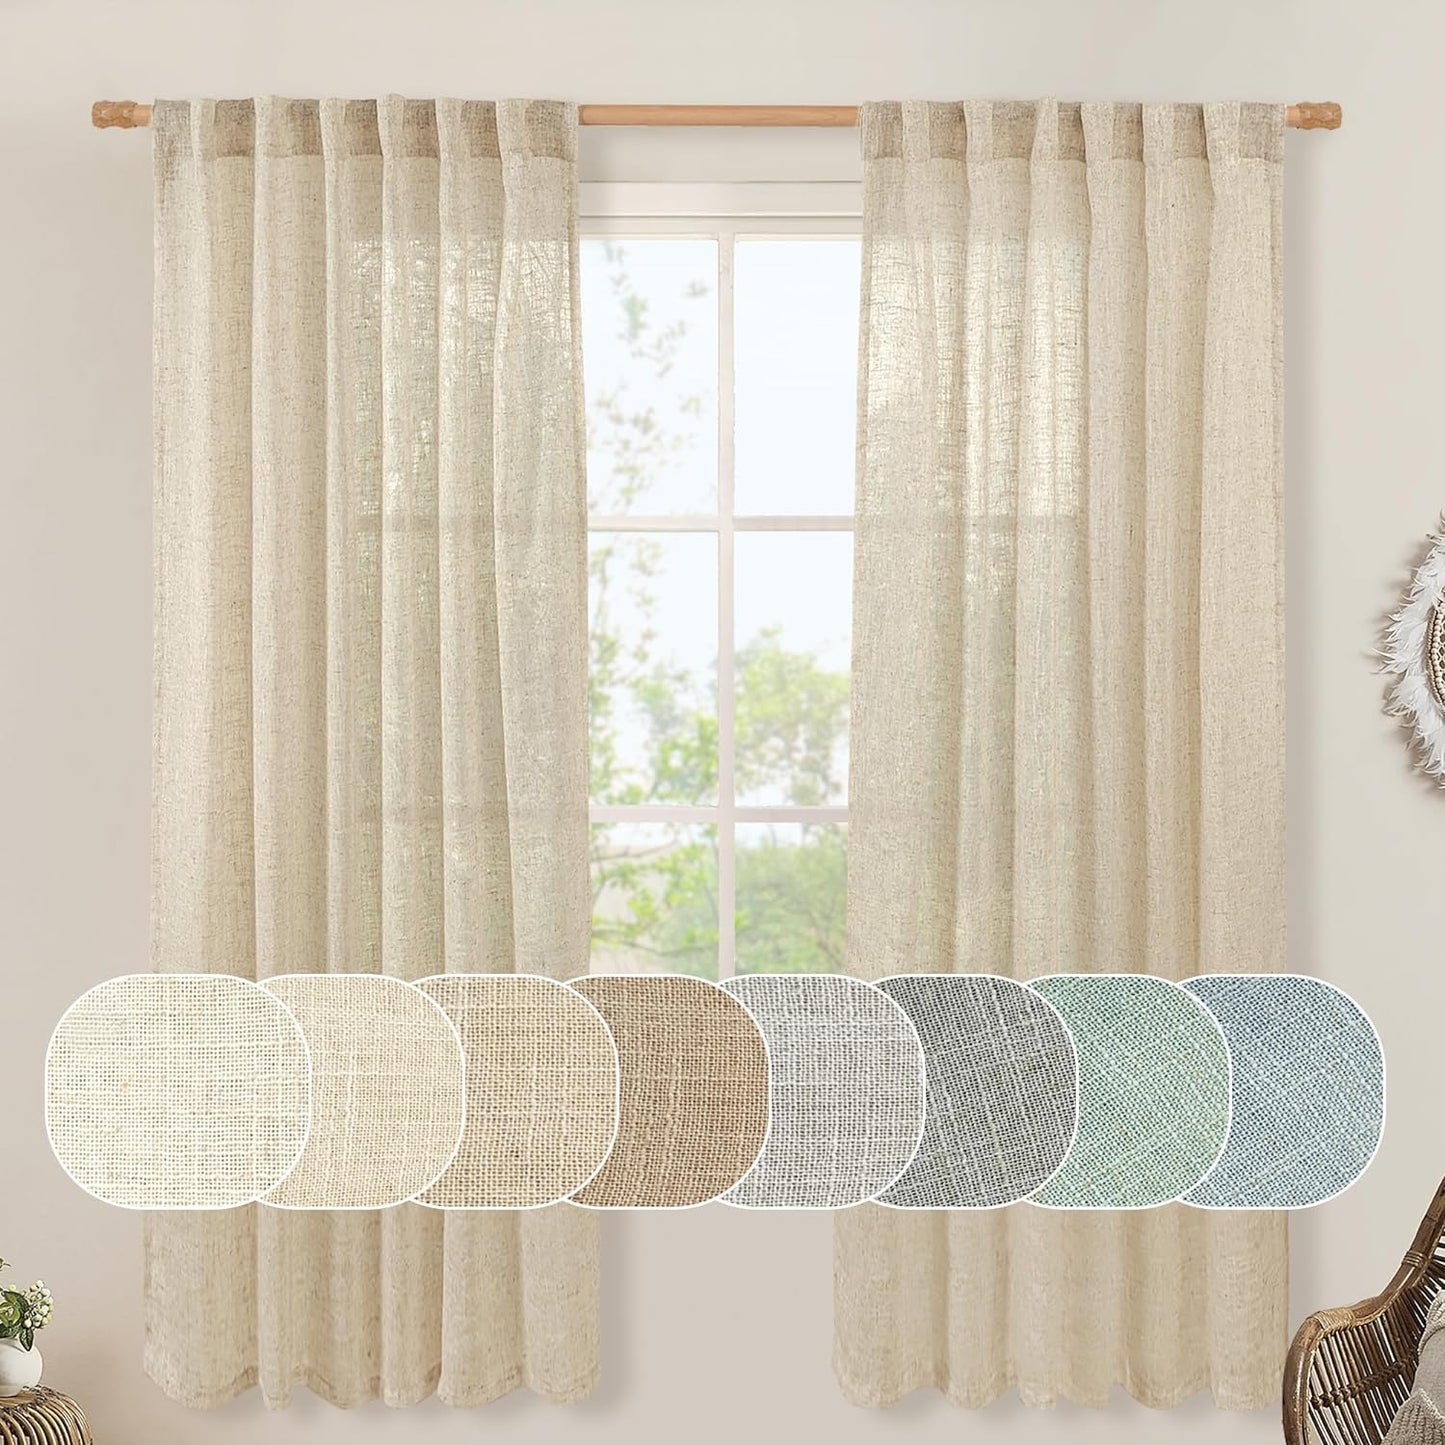 LAMIT Natural Linen Blended Curtains for Living Room, Back Tab and Rod Pocket Semi Sheer Curtains Light Filtering Country Rustic Drapes for Bedroom/Farmhouse, 2 Panels,52 X 108 Inch, Linen  LAMIT Linen 52W X 72L 